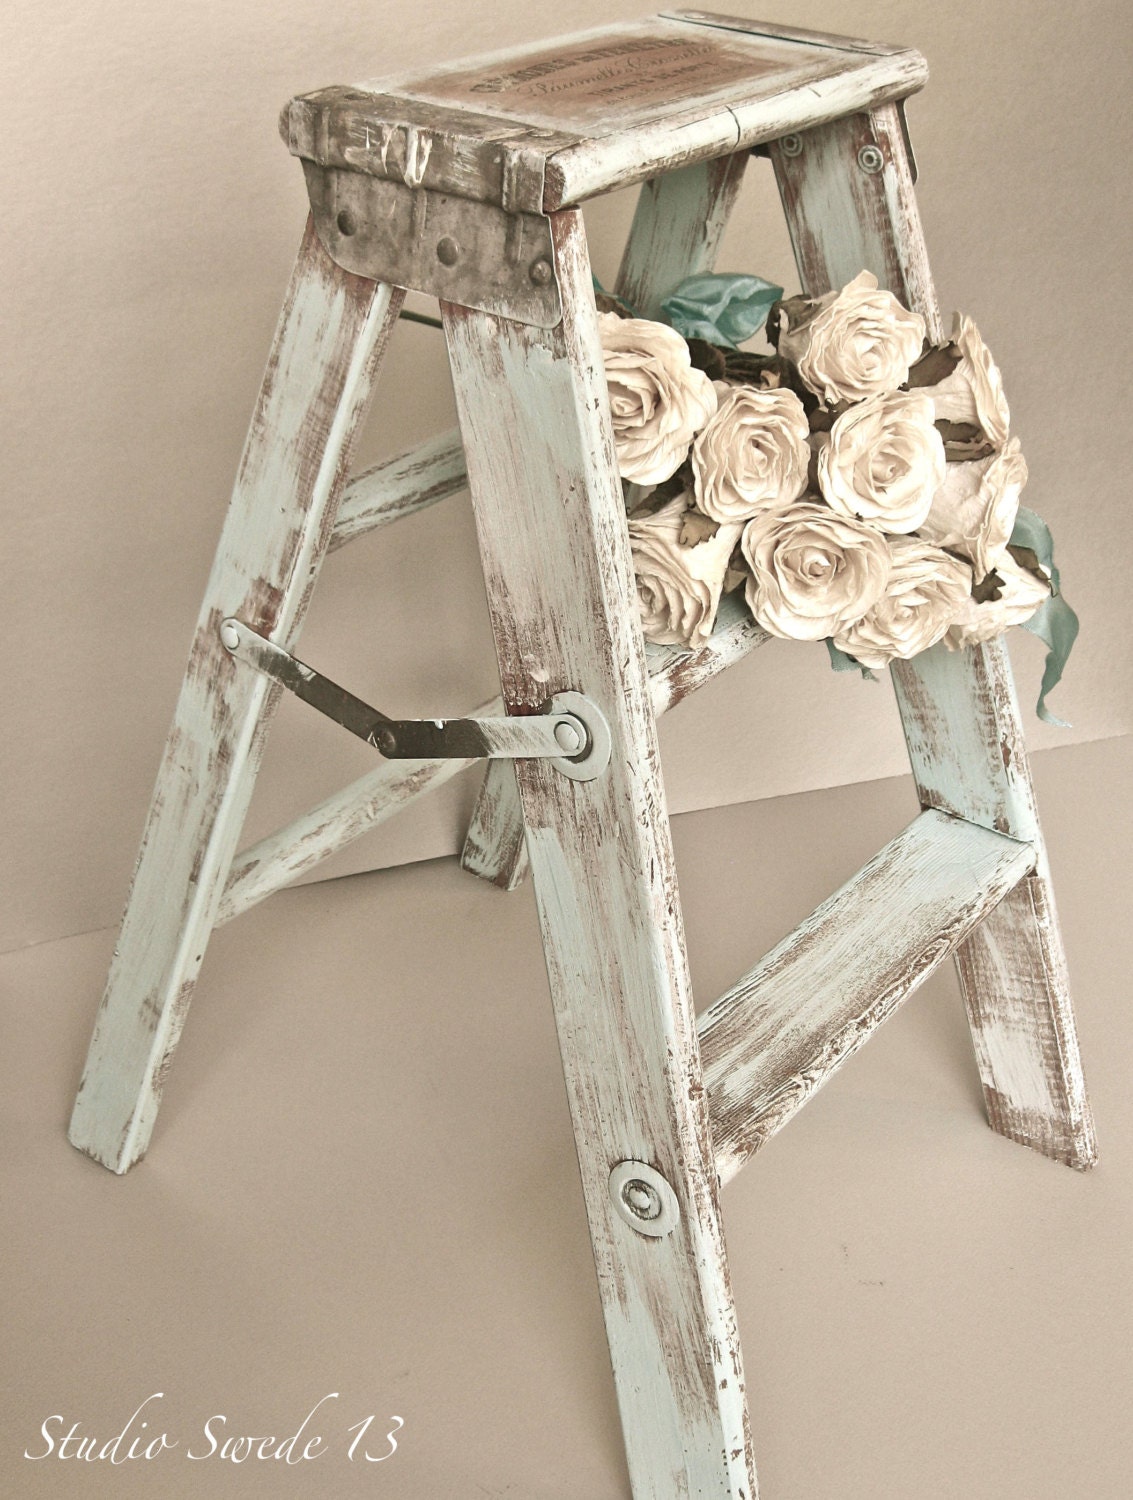 French Country Photography, Fine Art, Vintage Step Stool, Old Ladder, Shabby and Chic, Aqua Blue, Rustic Farmhouse, Wall Art - StudioSwede13